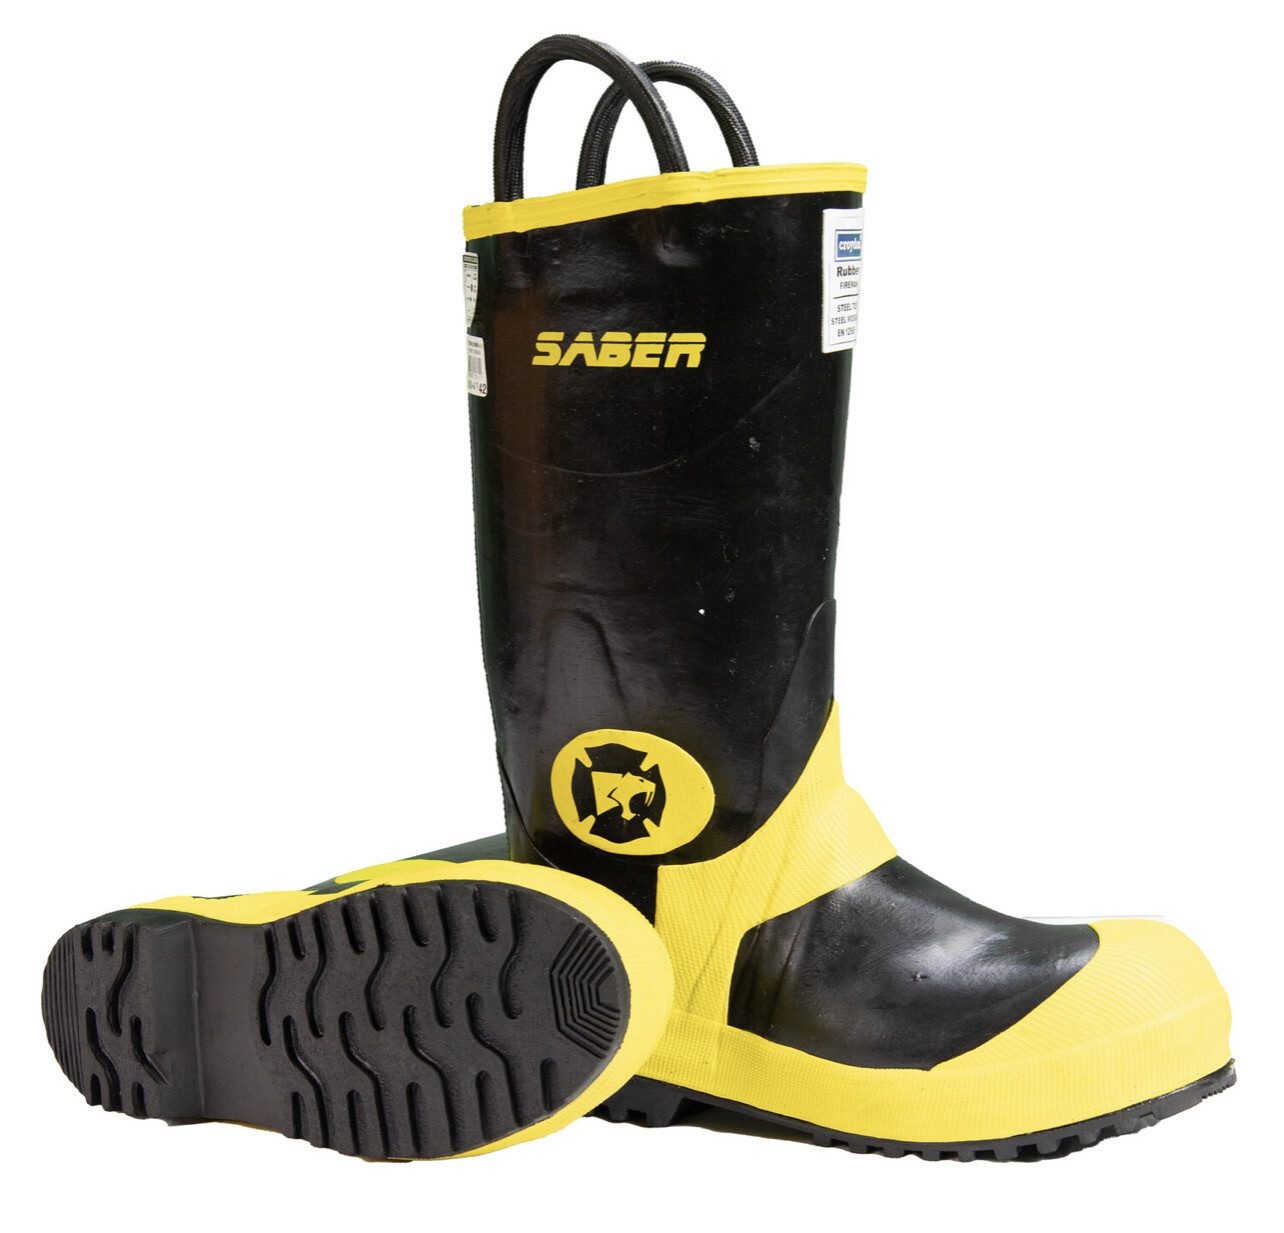 Saber Rubber Firefighter Structural Boot